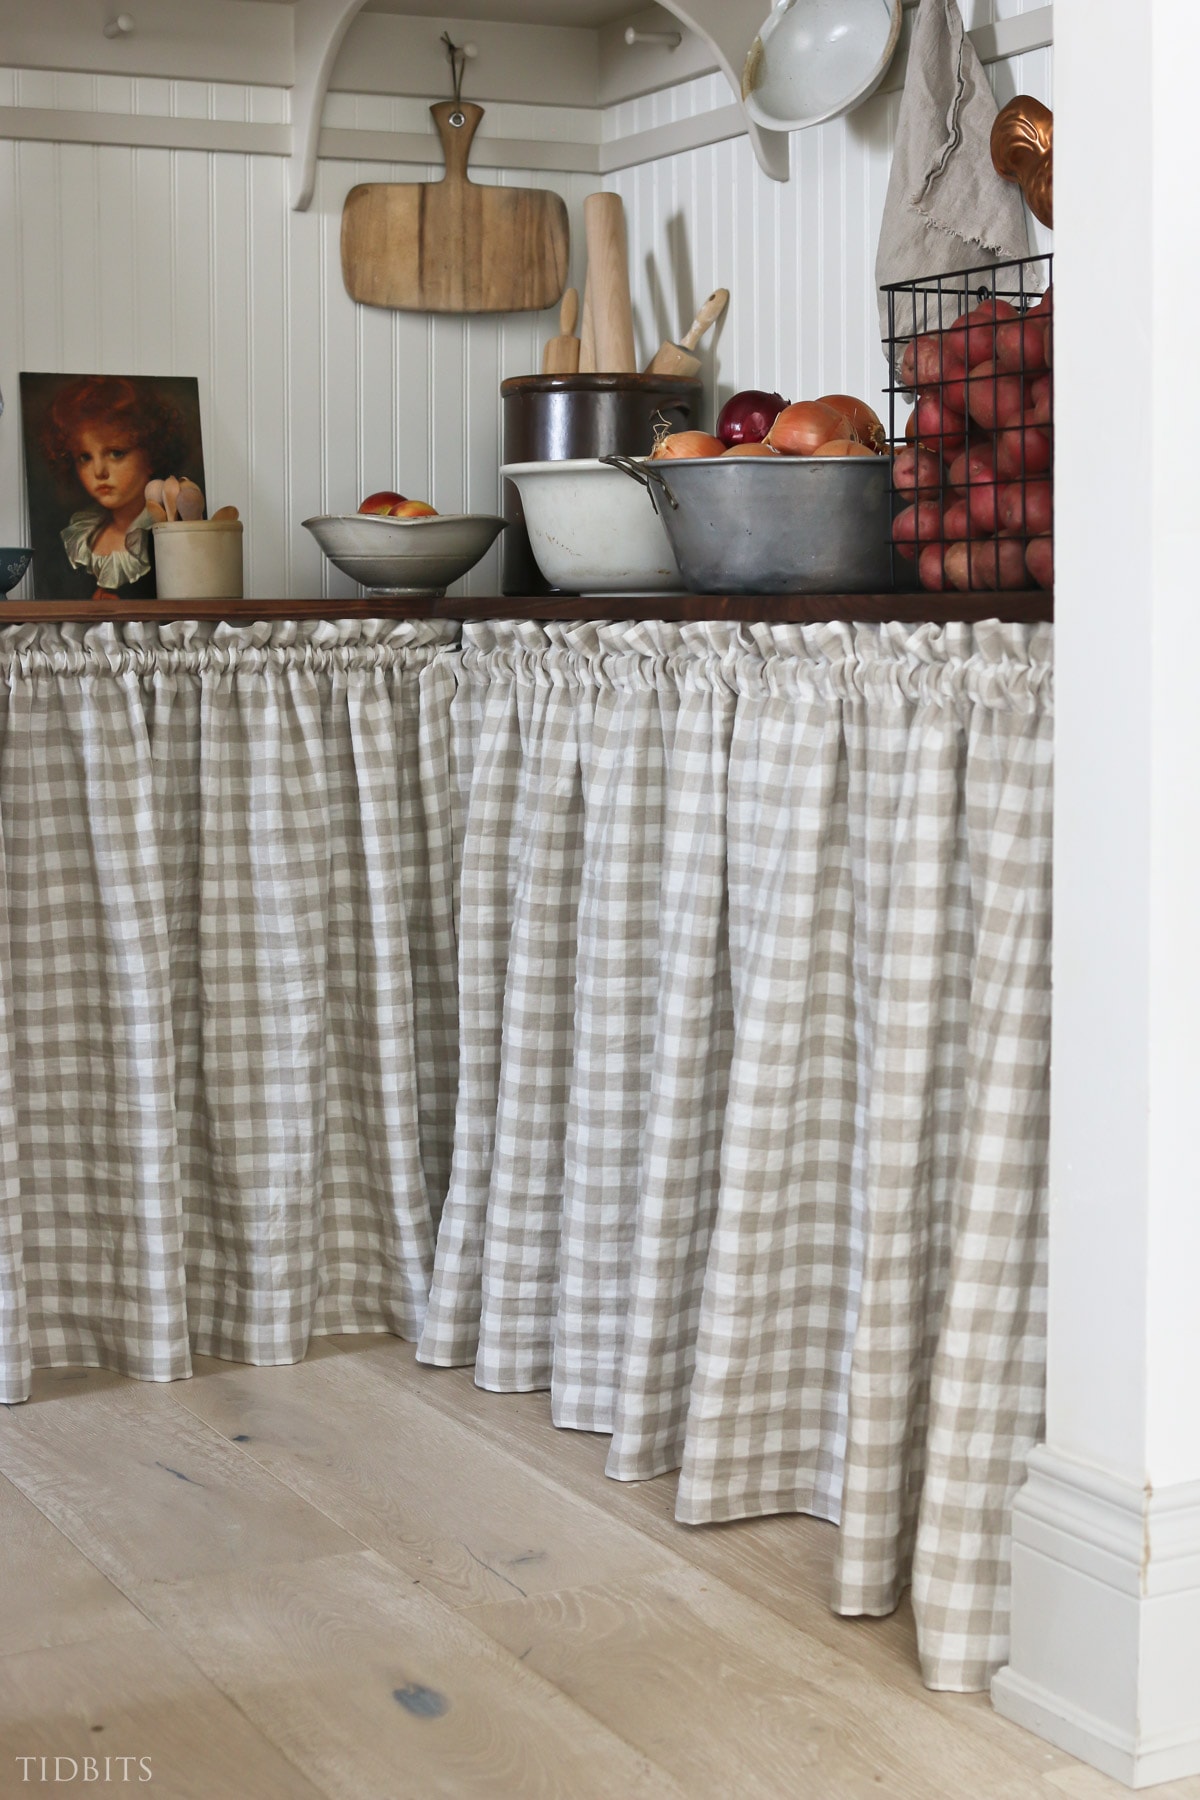 How to make cabinet curtains